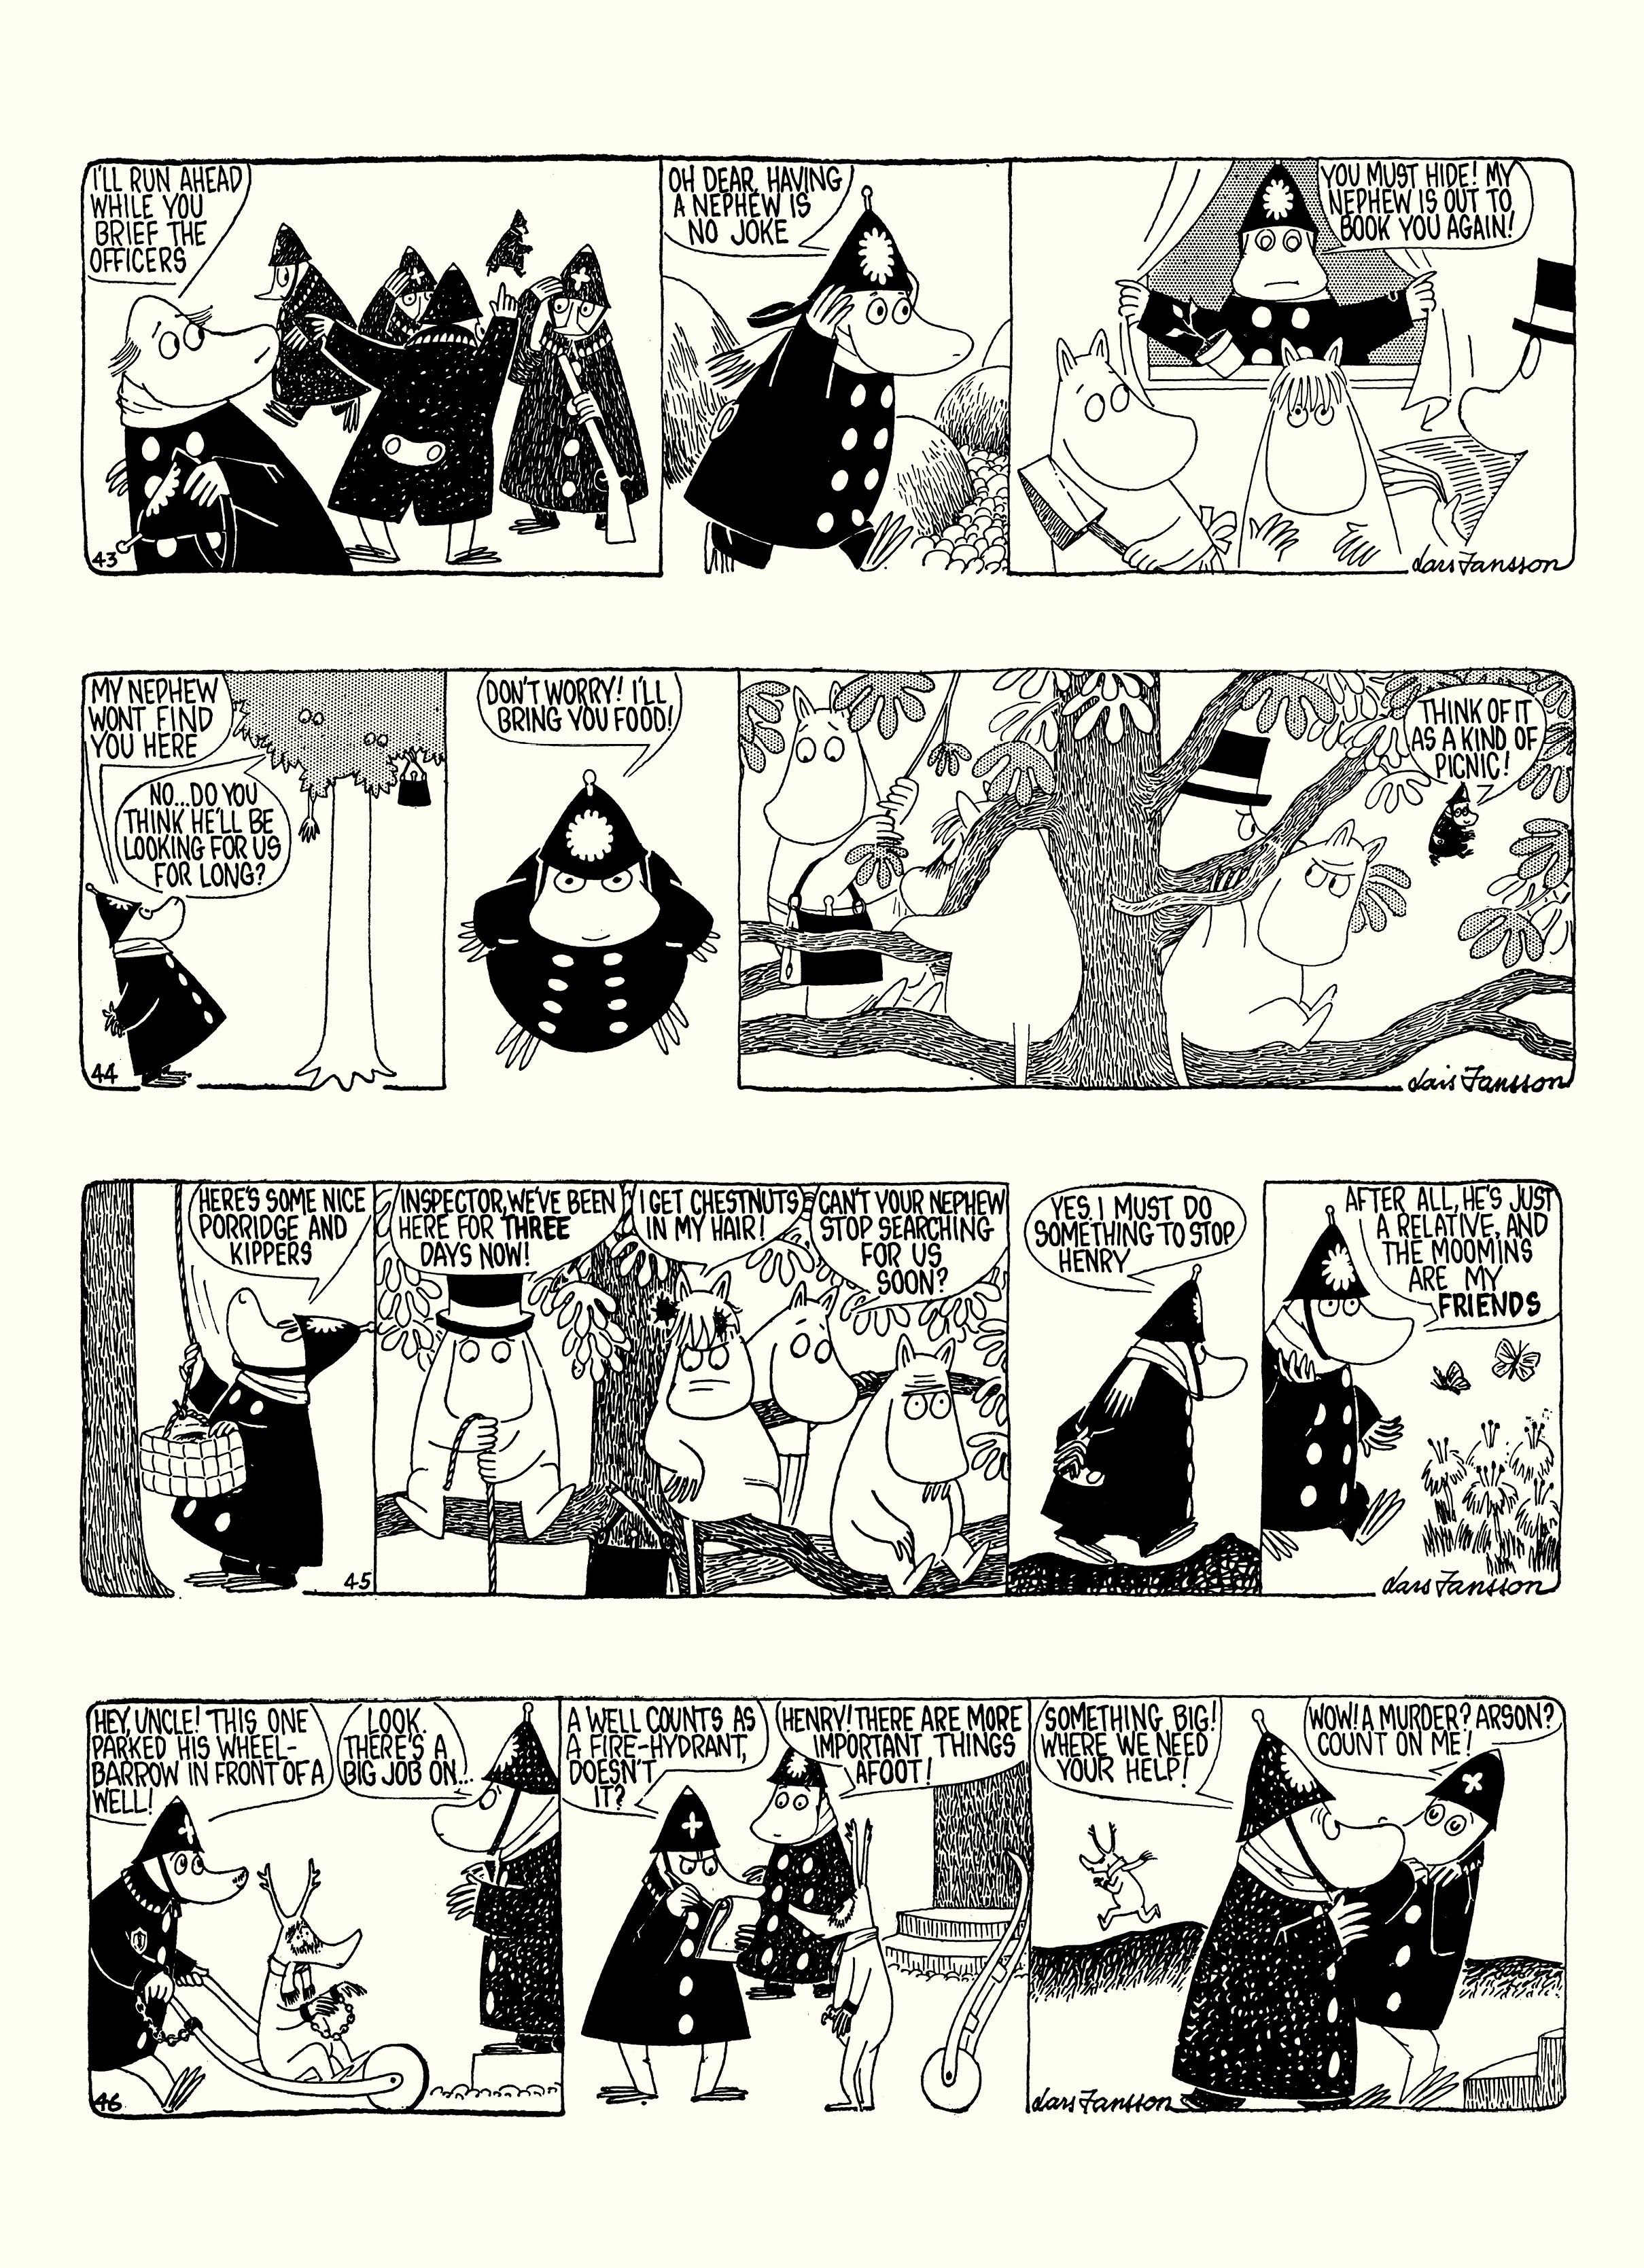 Read online Moomin: The Complete Lars Jansson Comic Strip comic -  Issue # TPB 8 - 82